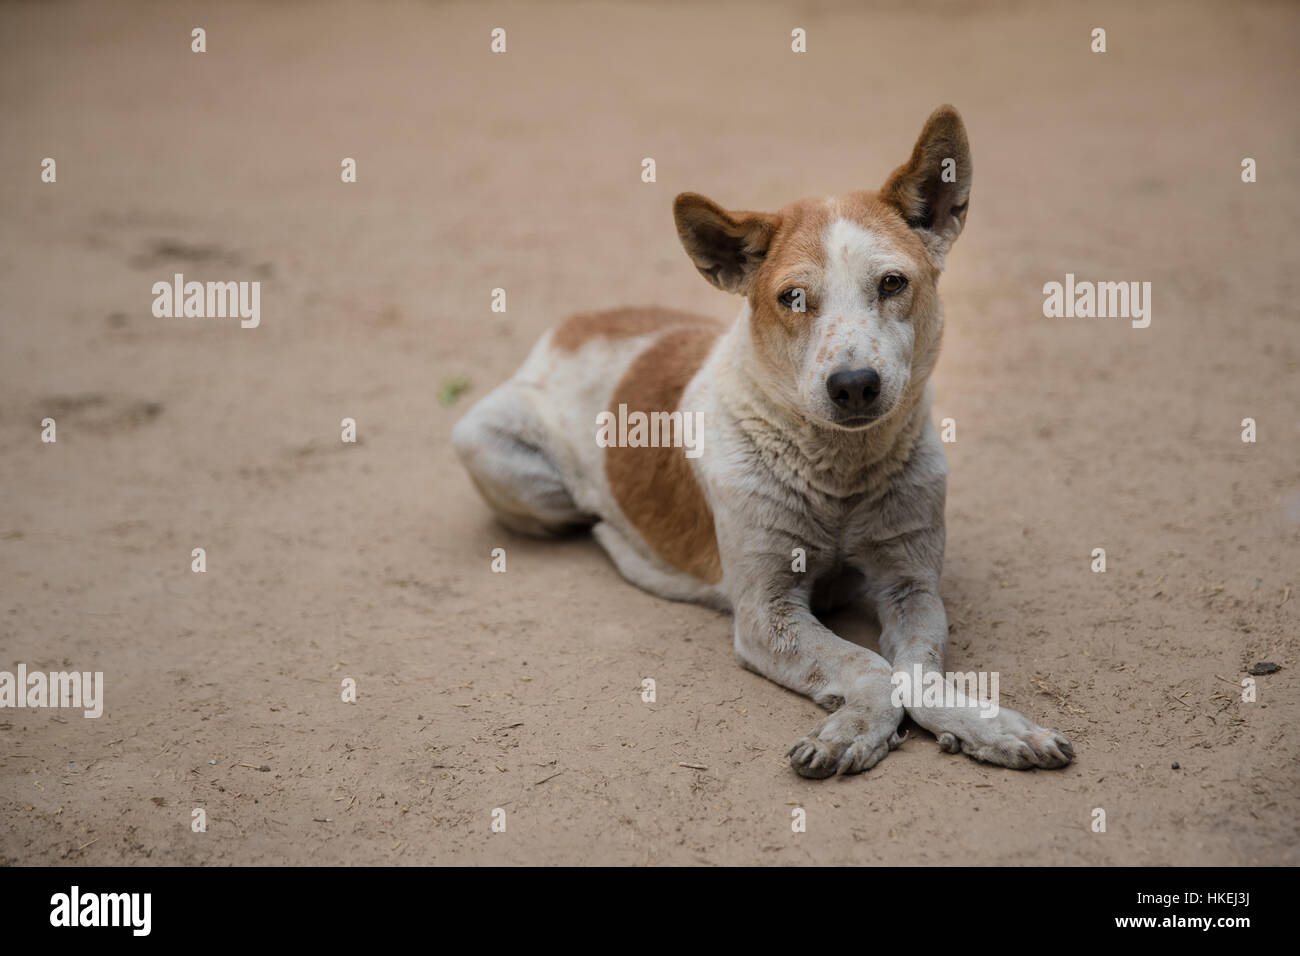 A dog with opposing paws, allegedly caused by polio disease, in India. Stock Photo